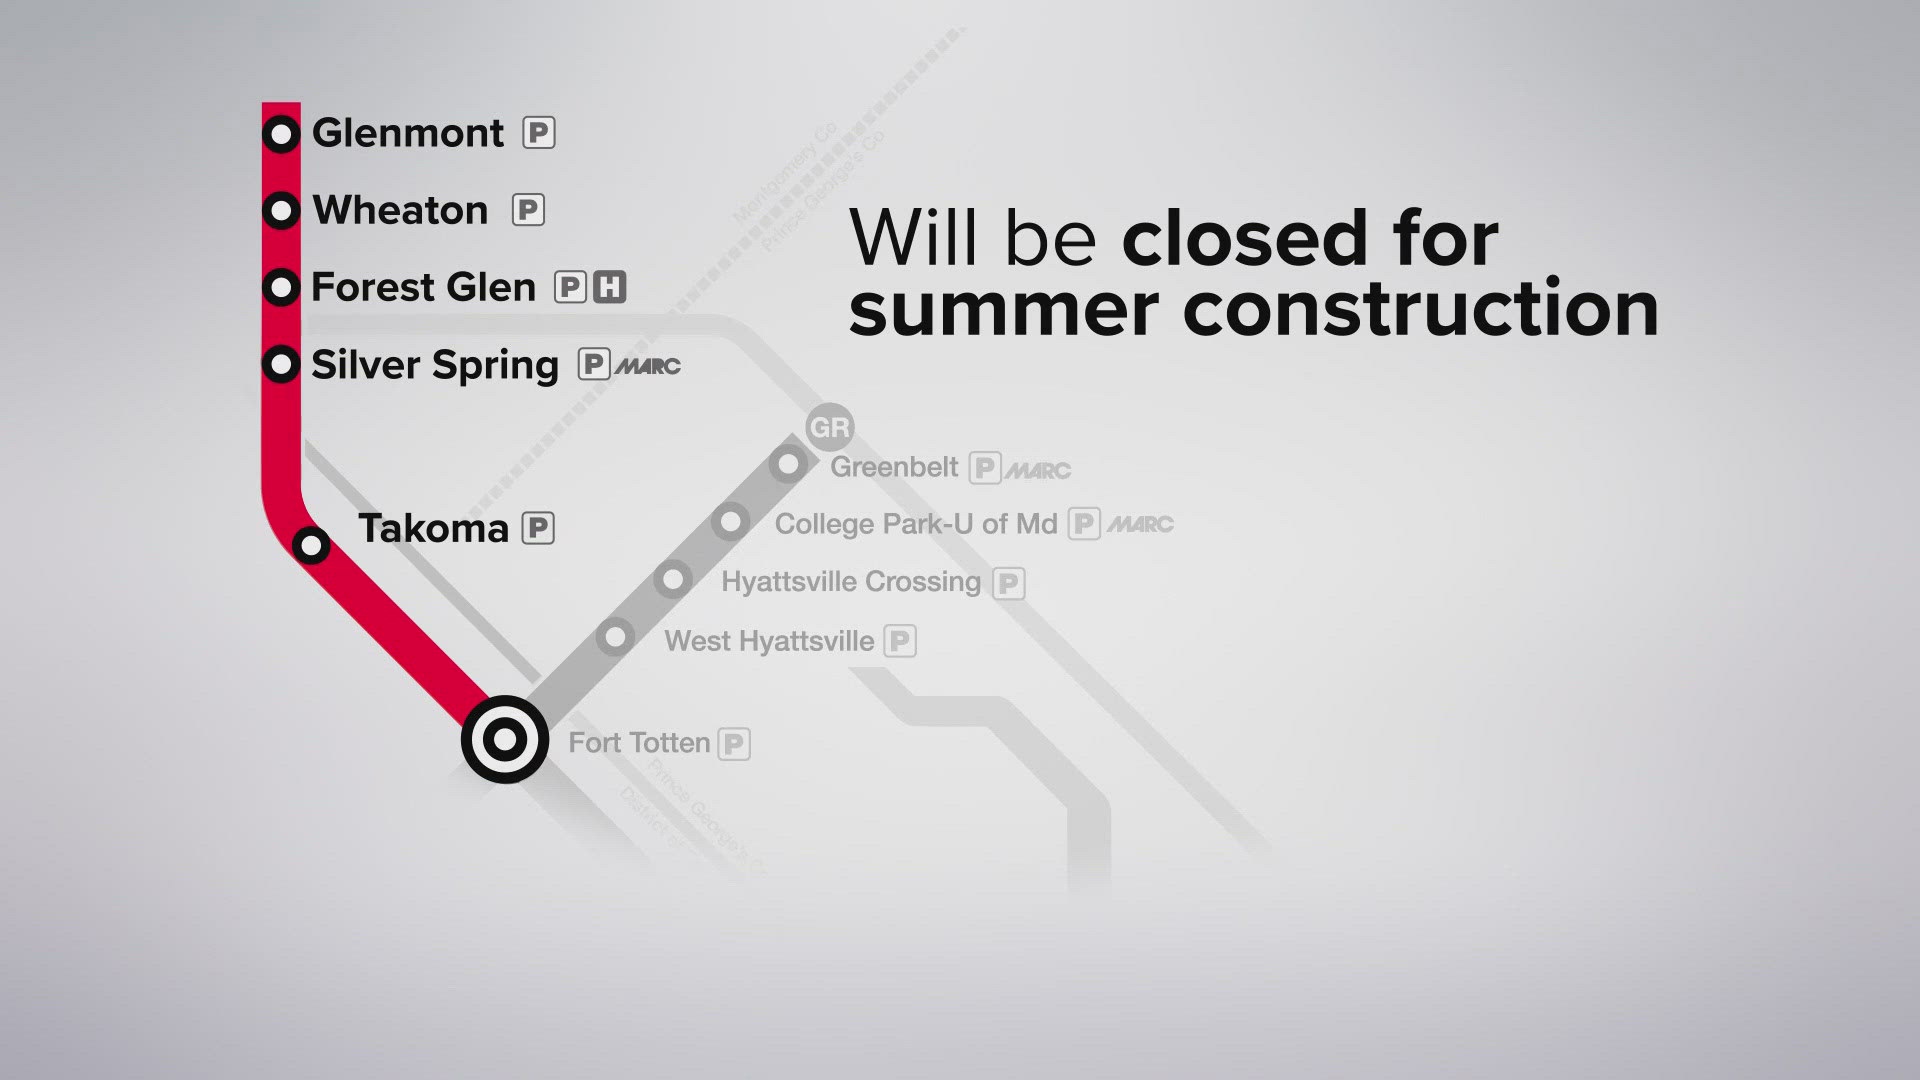 WMATA has announced expanded shuttle service starting June 1.